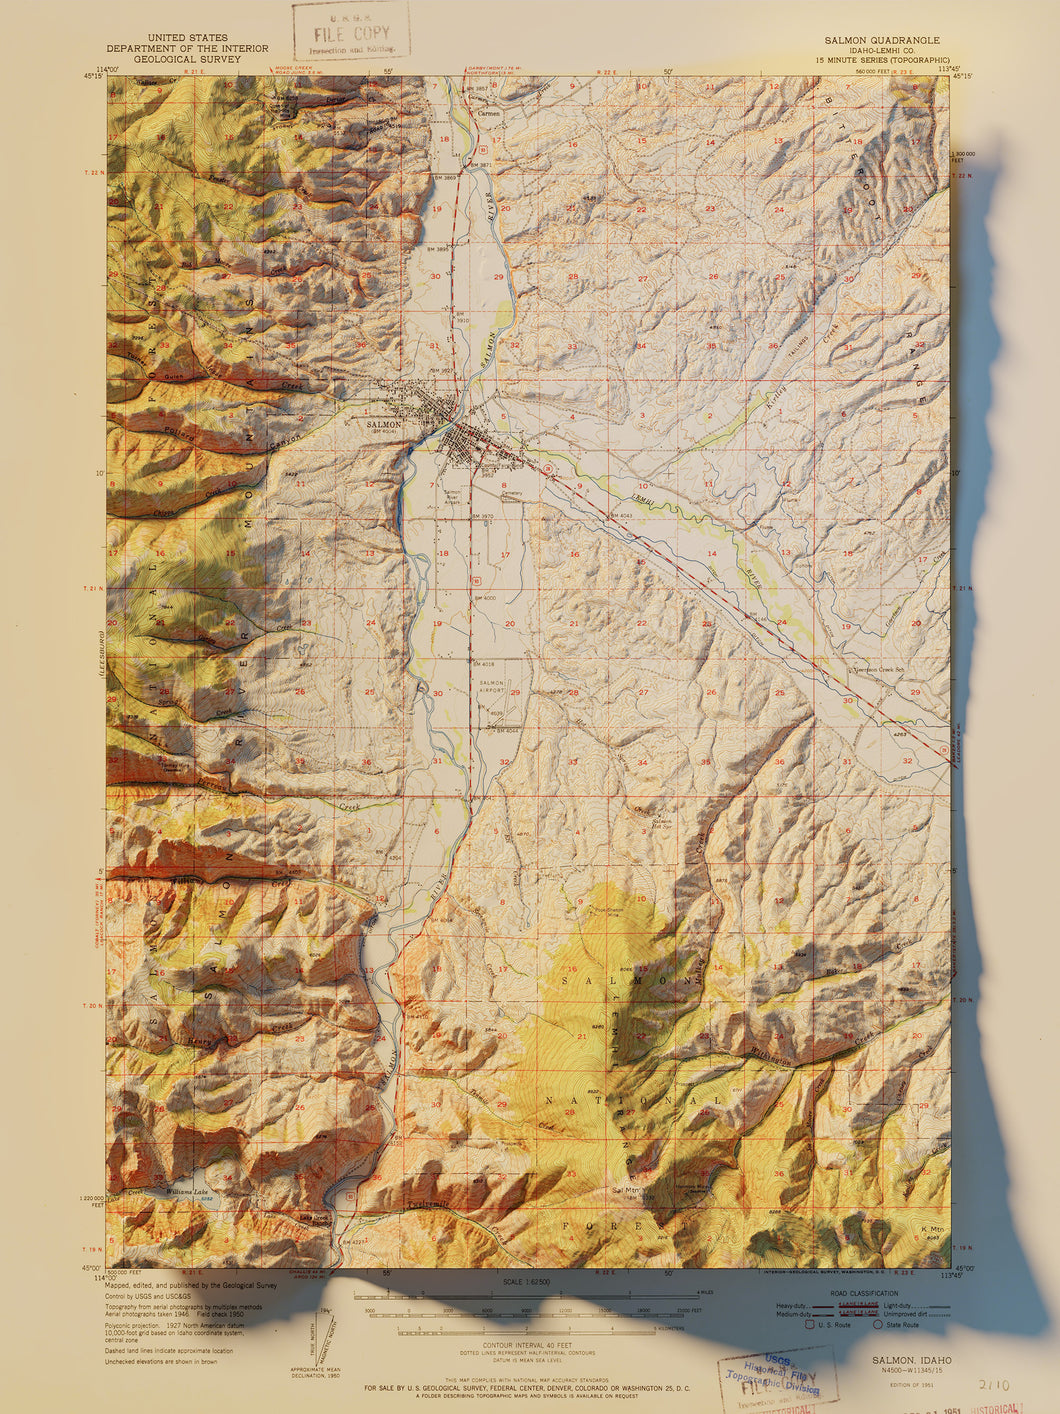 Salmon Idaho | Shaded Relief Topographic Map